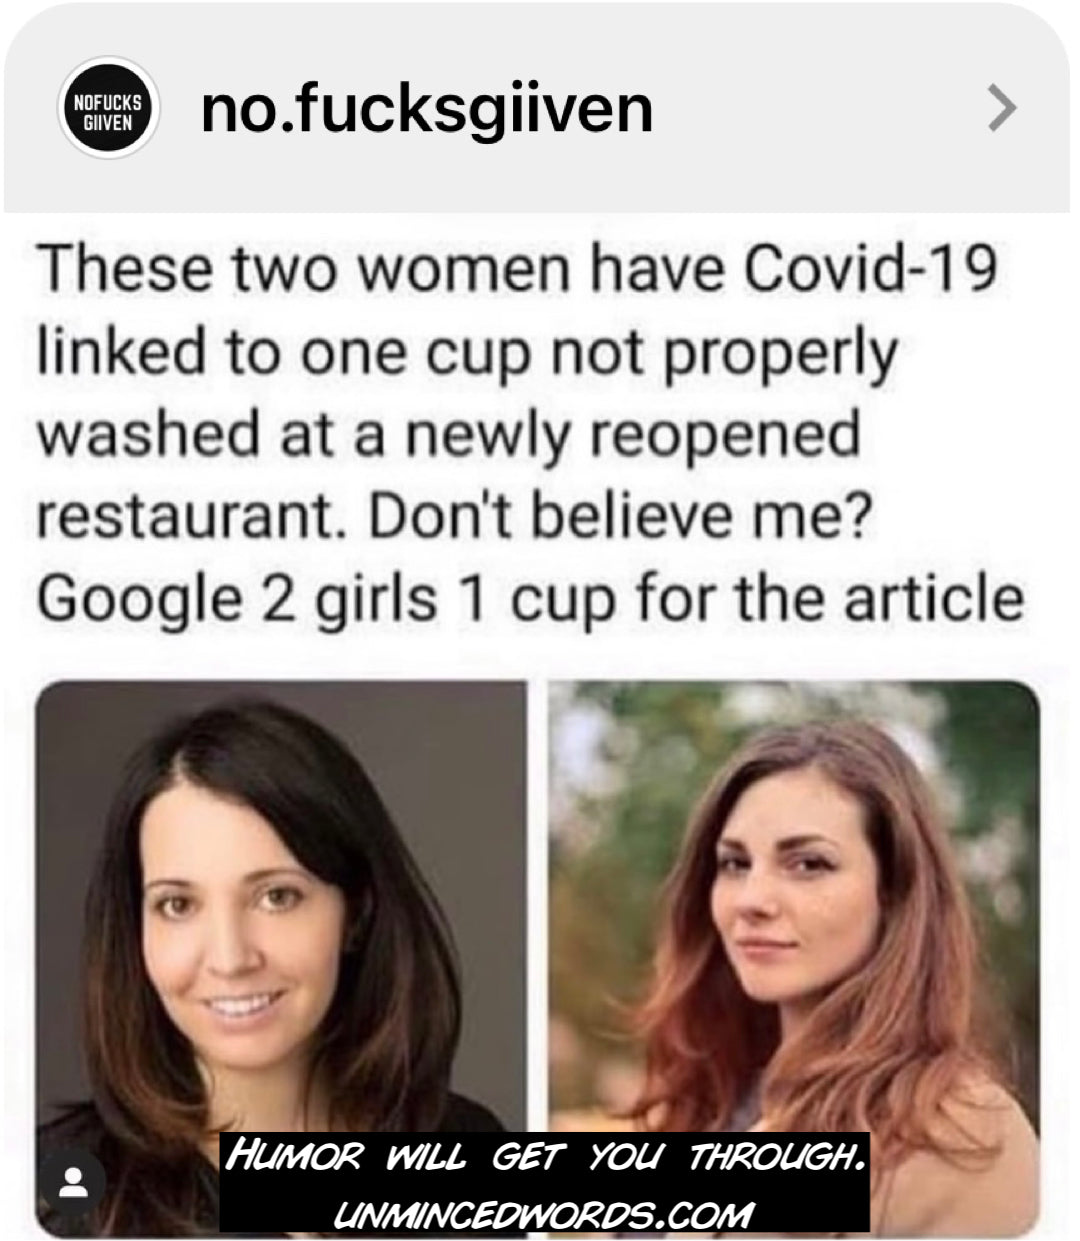 These two women have Covid-19 linked to one cup not properly